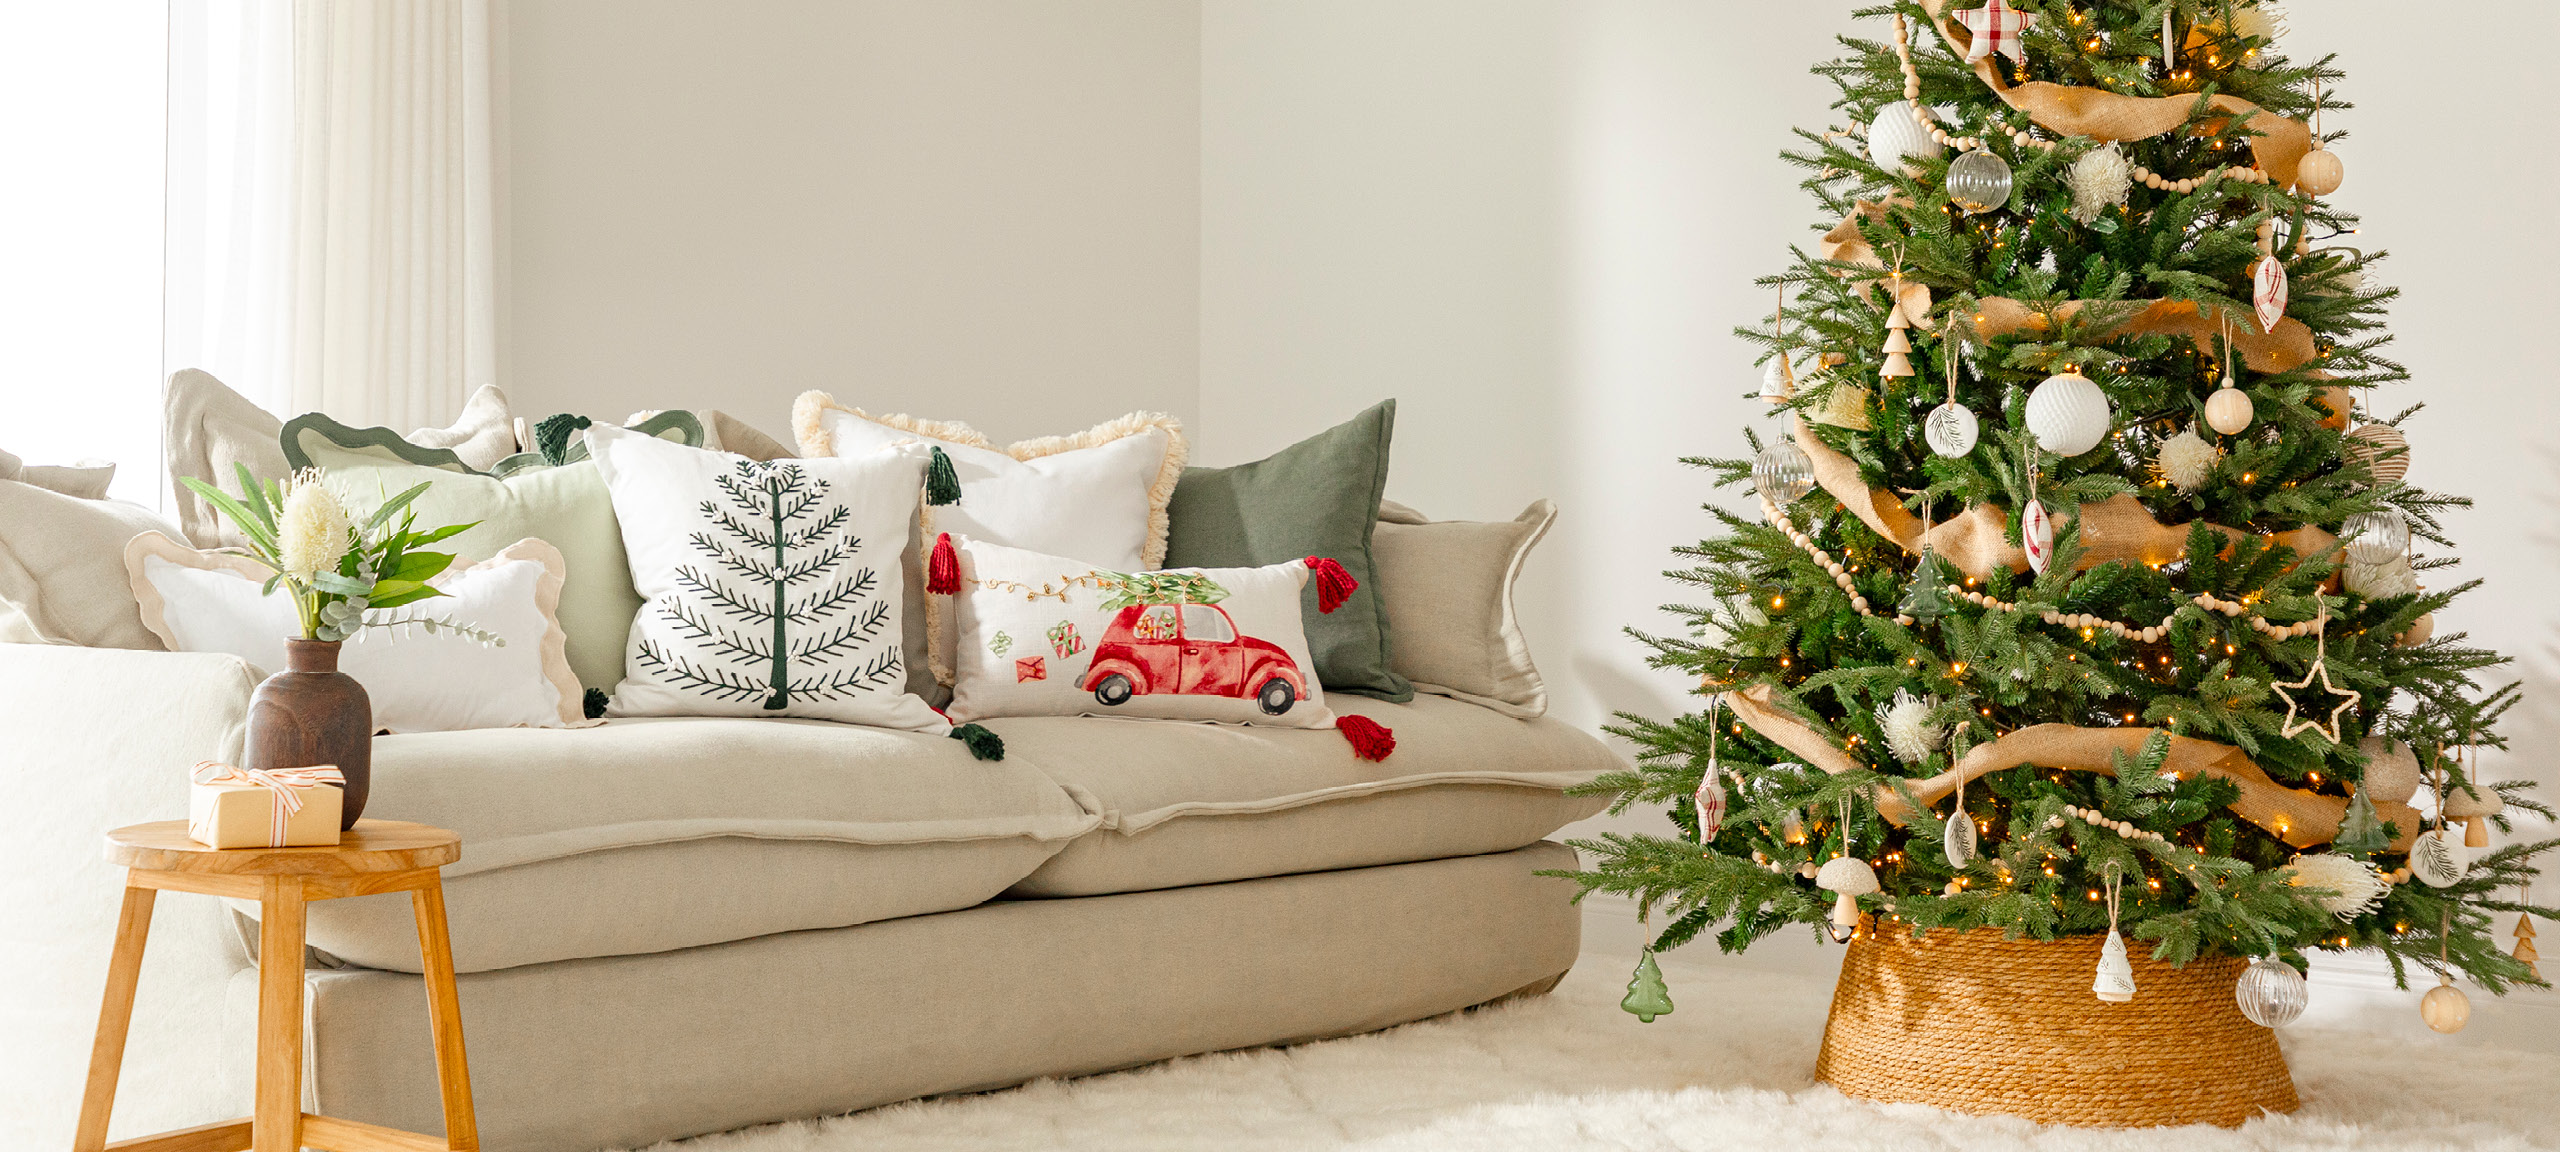 Pillow Talk traditional Christmas tree styling 